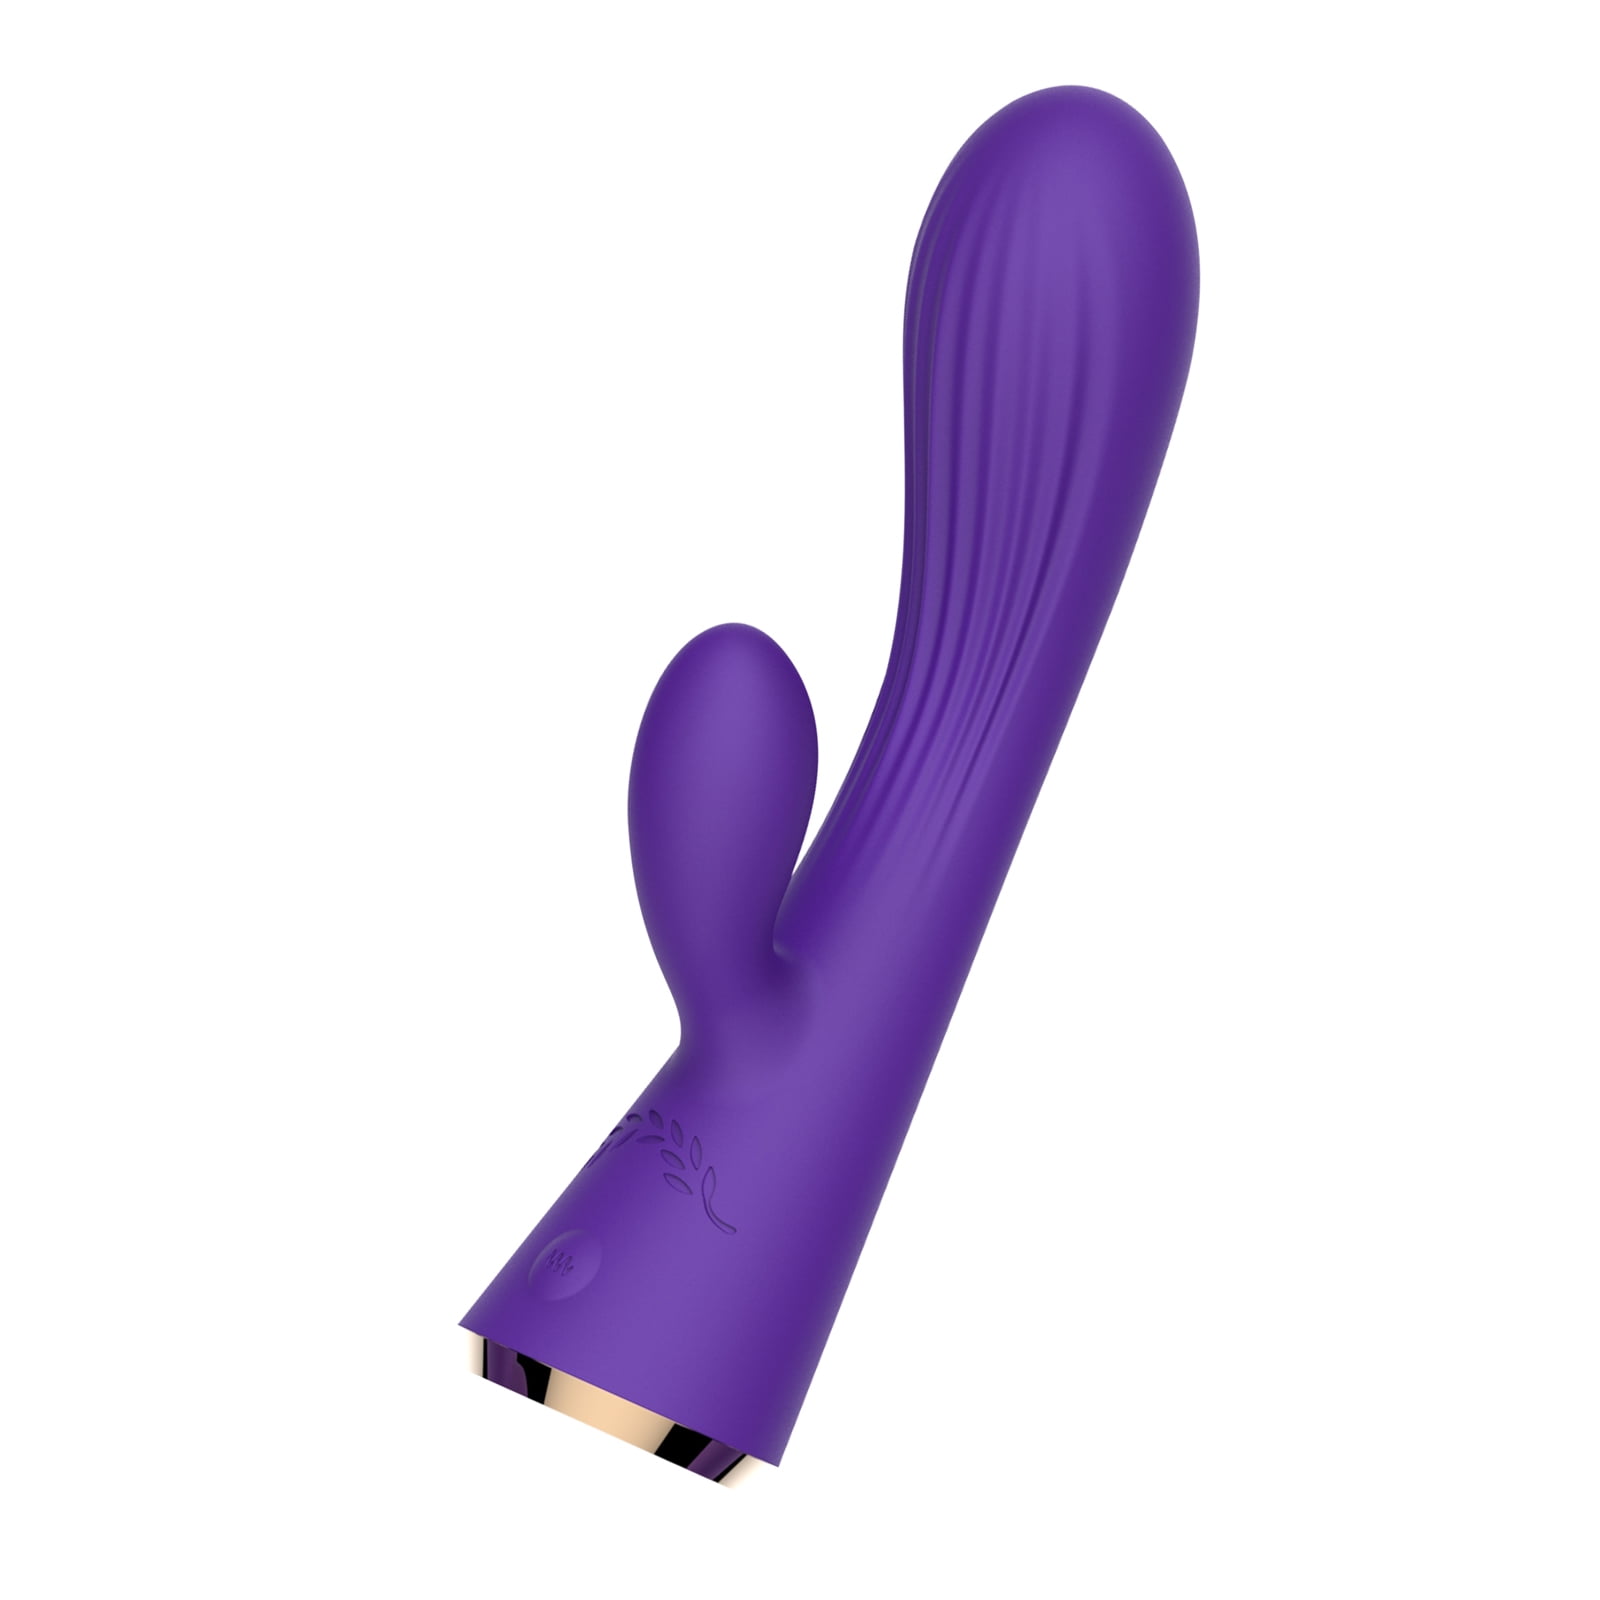 Tracy's Dog Wireless Partner Couple Vibrator For Clitoral & G-Spot  Stimulation With 7 Pulsating & Vibration Patterns - Price history & Review, AliExpress Seller - Tracy's dog Official Store